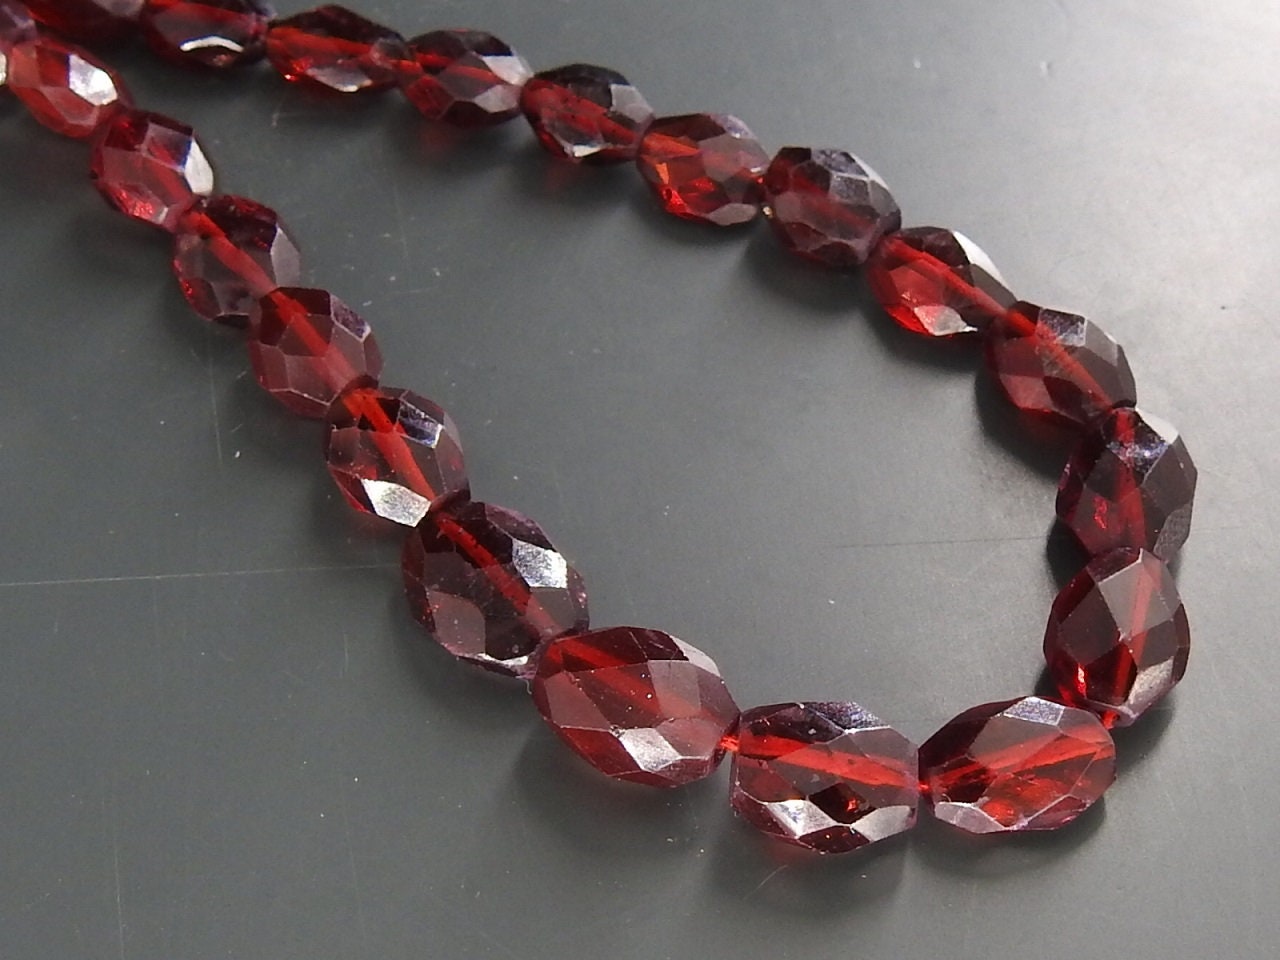 100%Natural Mozambique Garnet Faceted Tumble,Nugget,Loose Stone,Handmade,For Jewelry Making 16Inch Strand 10X7To5X4 MM Approx PMETU2 | Save 33% - Rajasthan Living 22